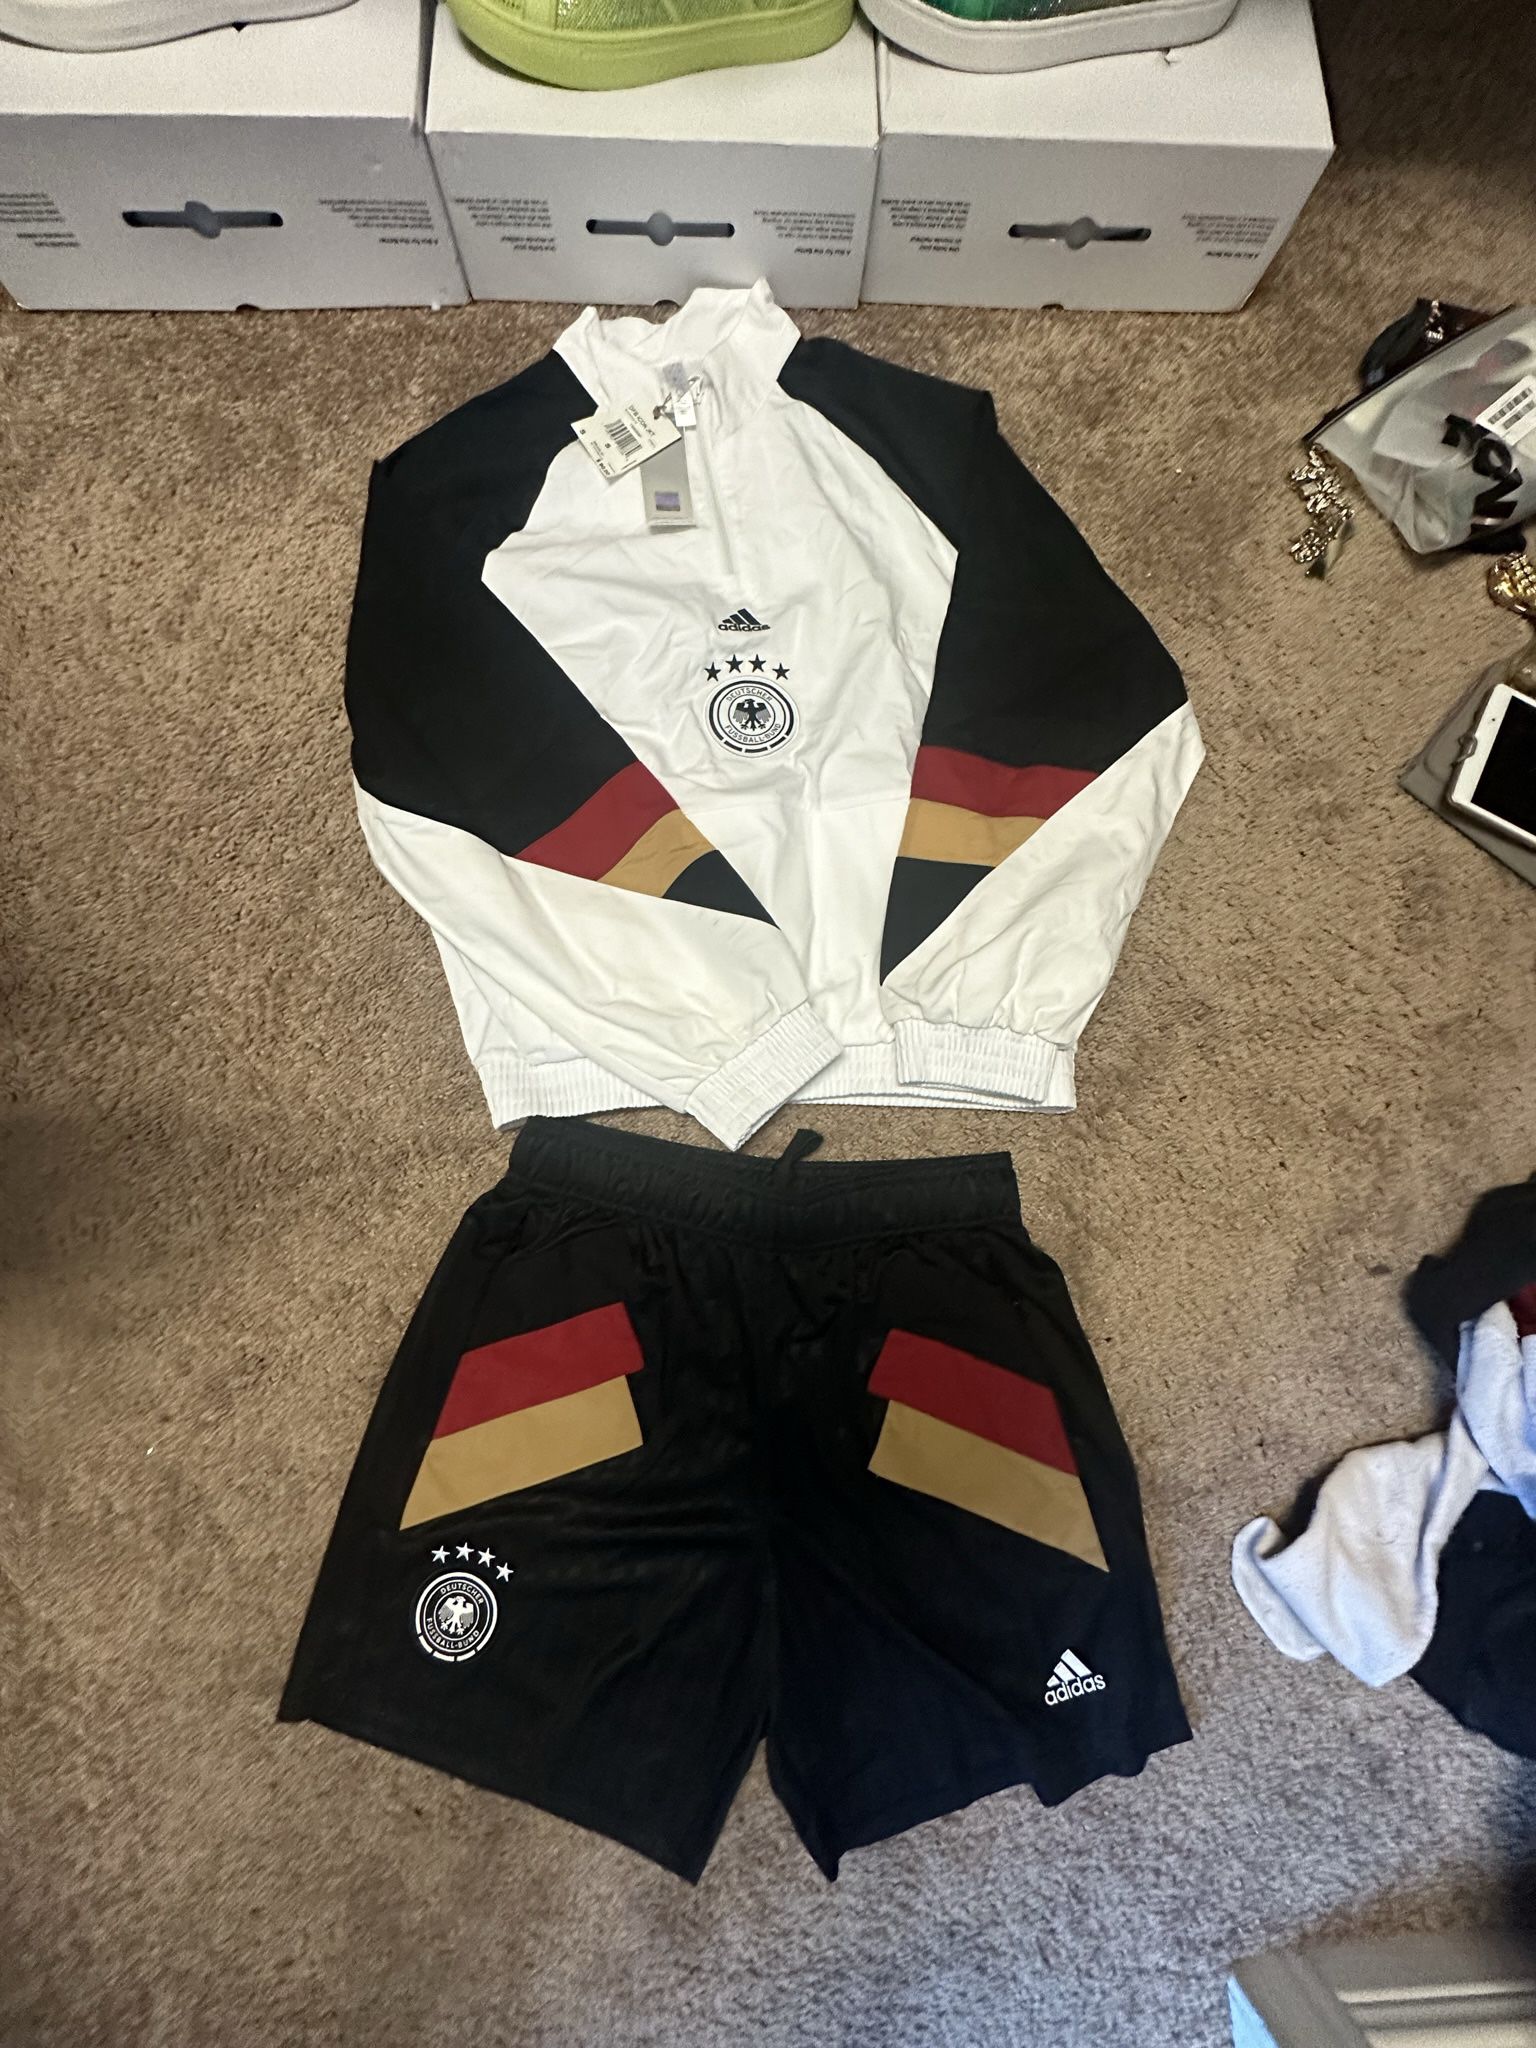 vena masa Ceder ADIDAS GERMANY TRACK SUIT Short Set BRAND NEW for Sale in Katy, TX - OfferUp